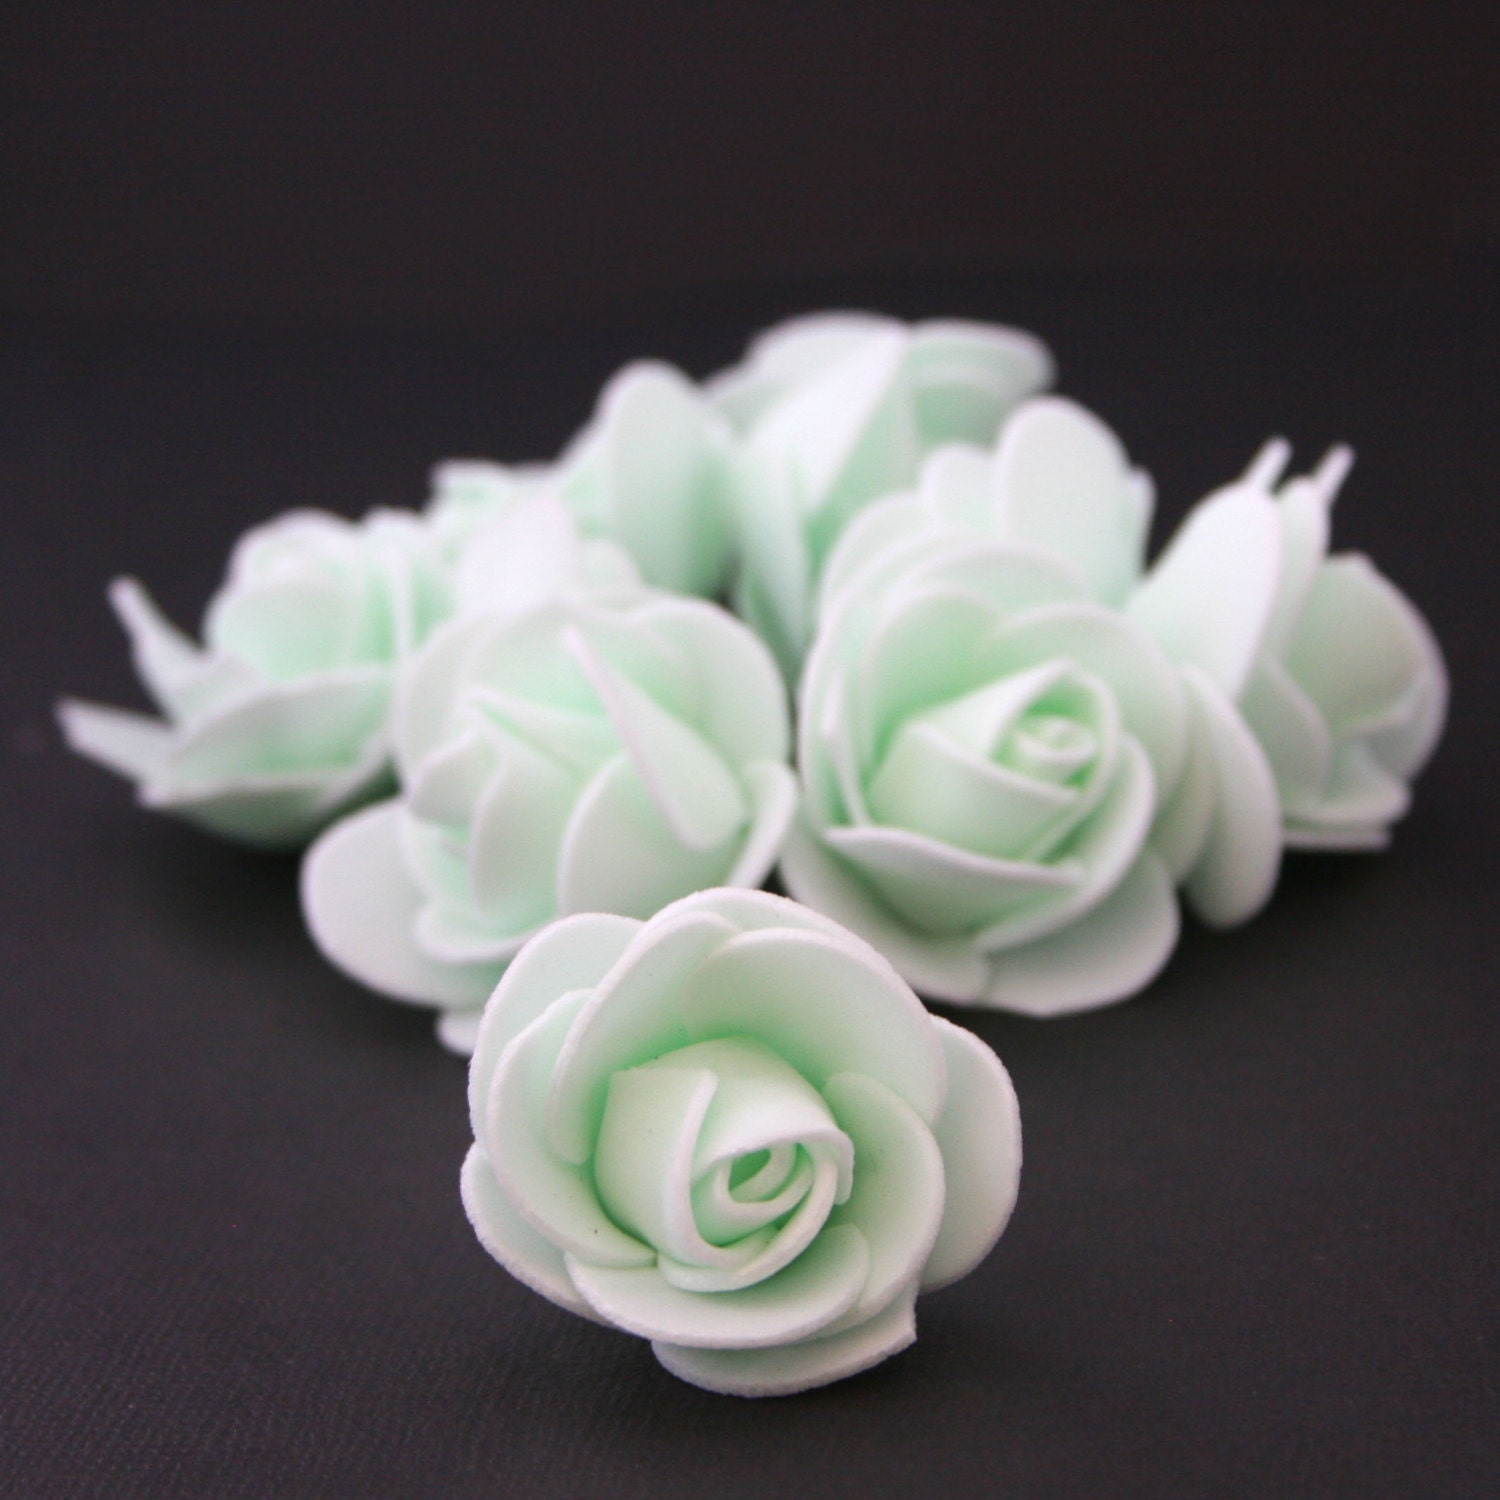 10 Delicious Mint Green Foam Roses Artificial Flowers